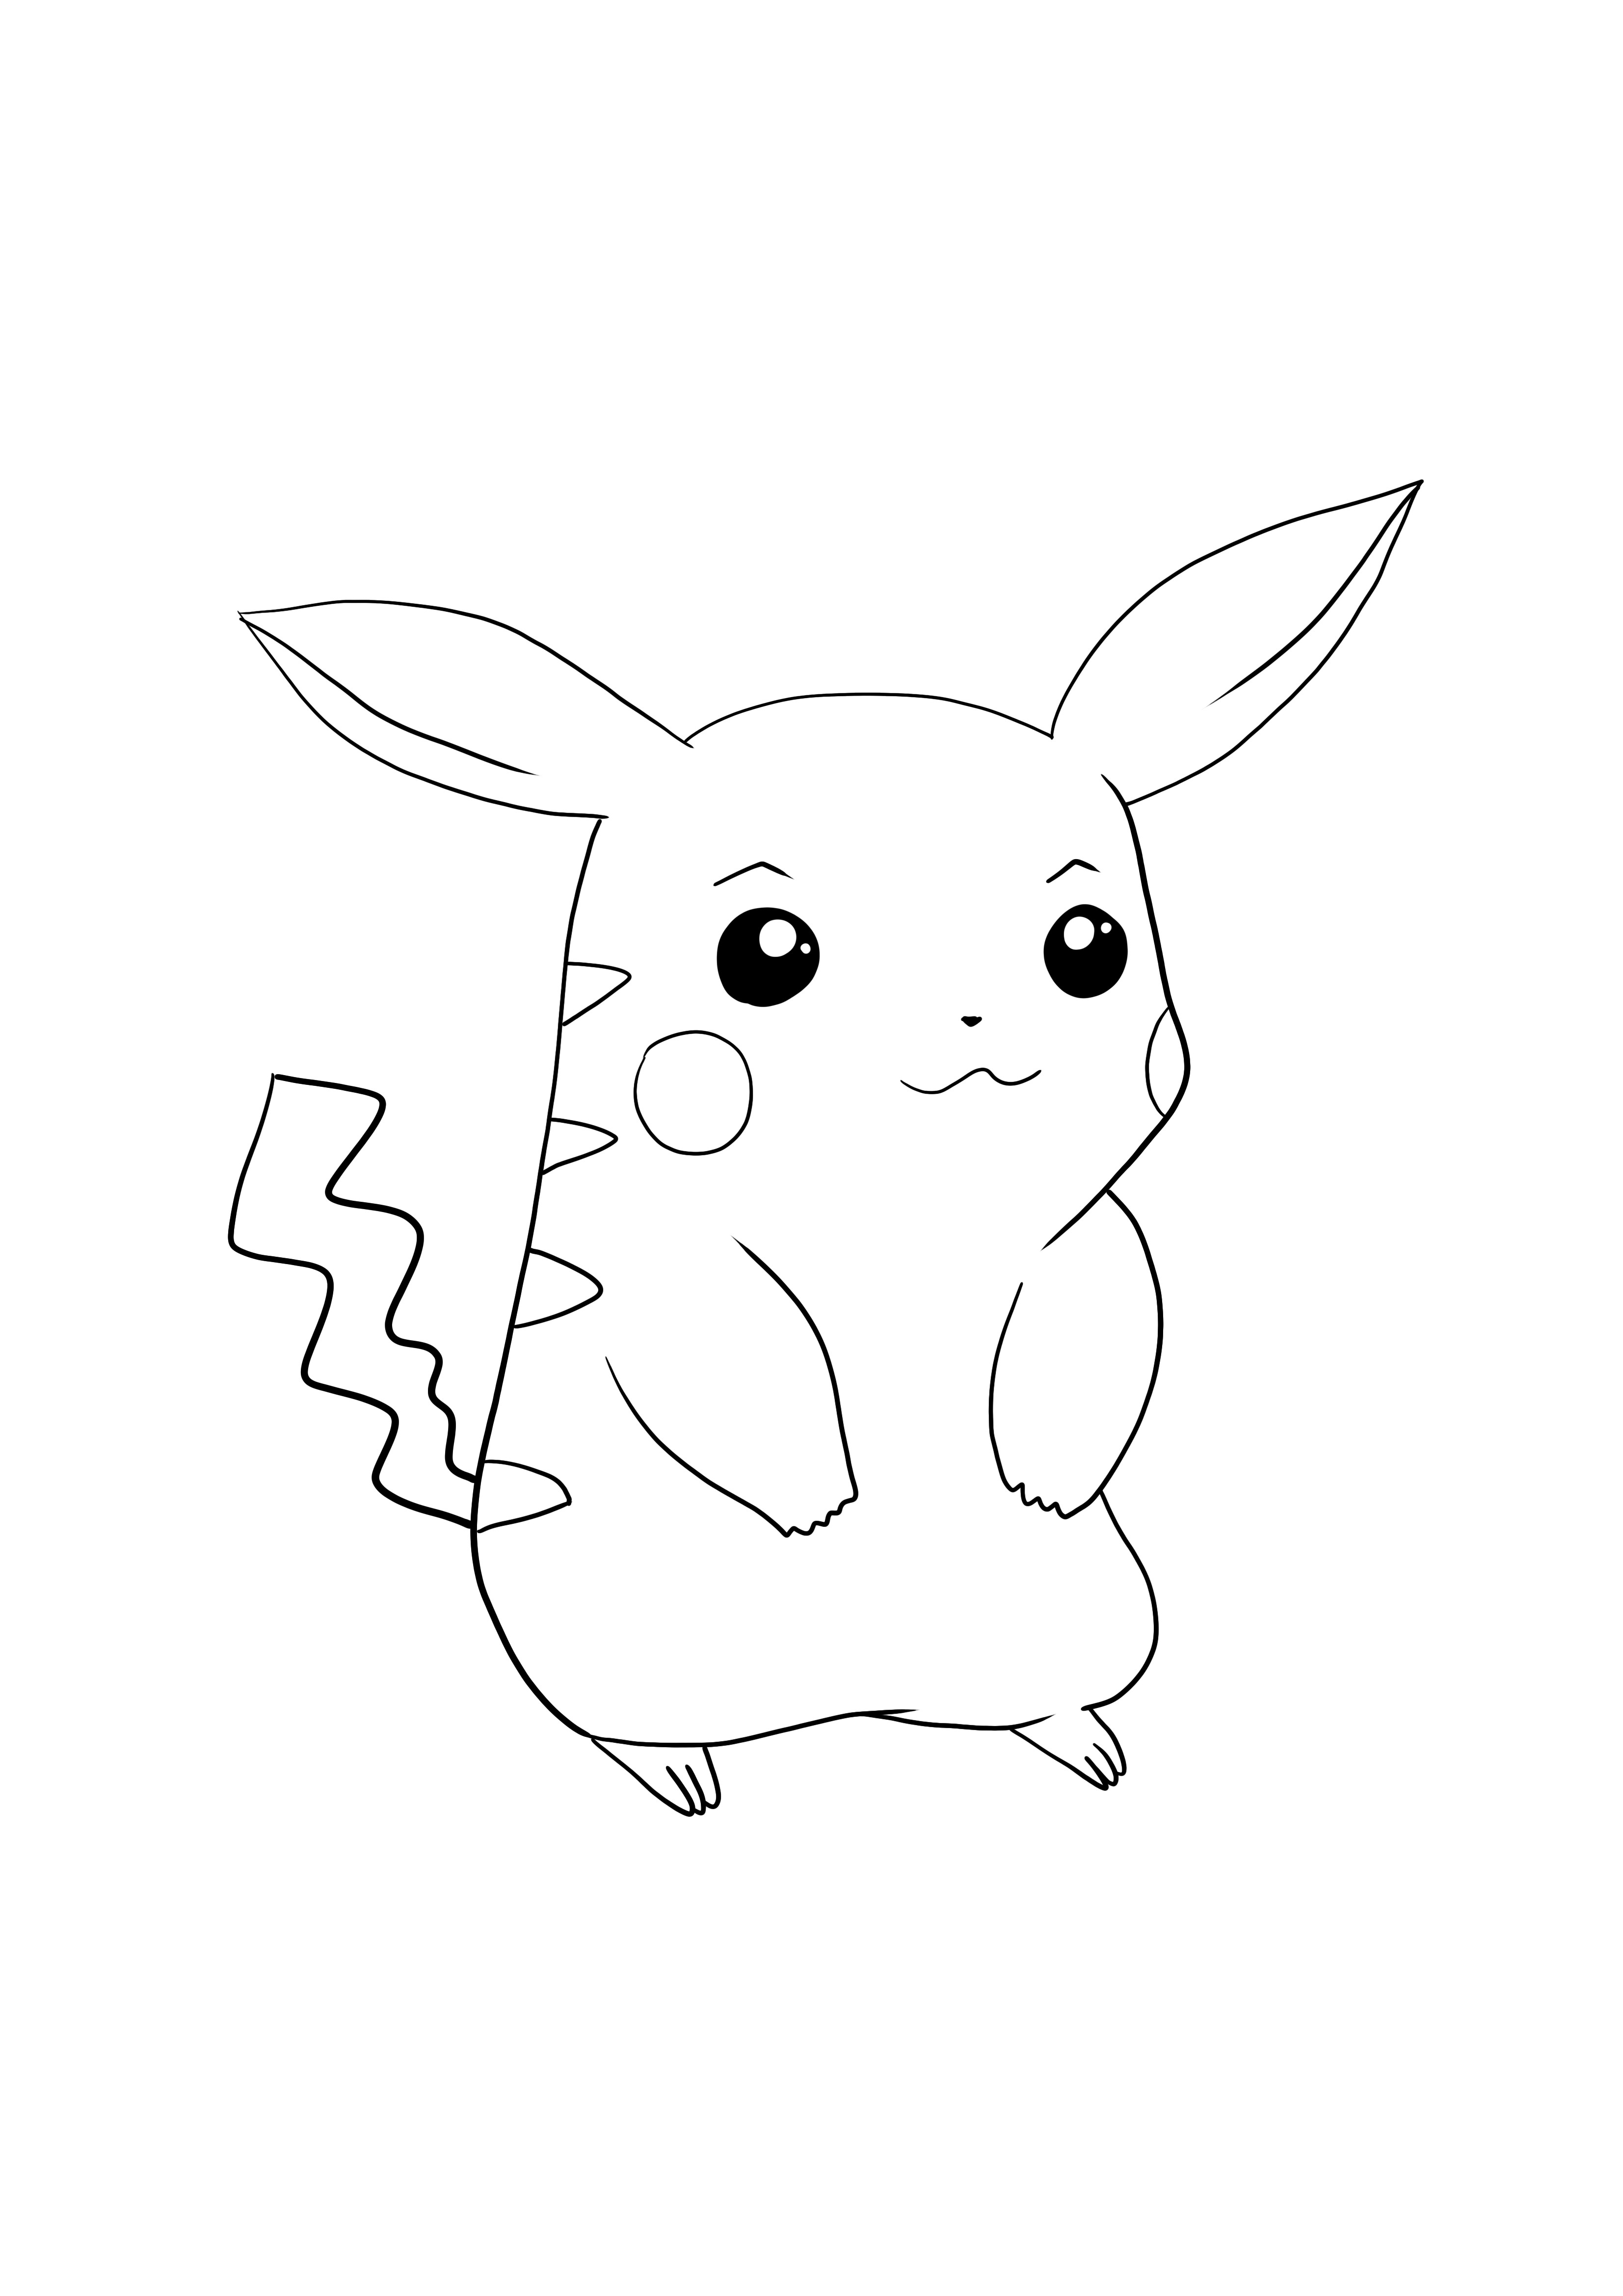 Pikachu-Pokémon go download and color free page